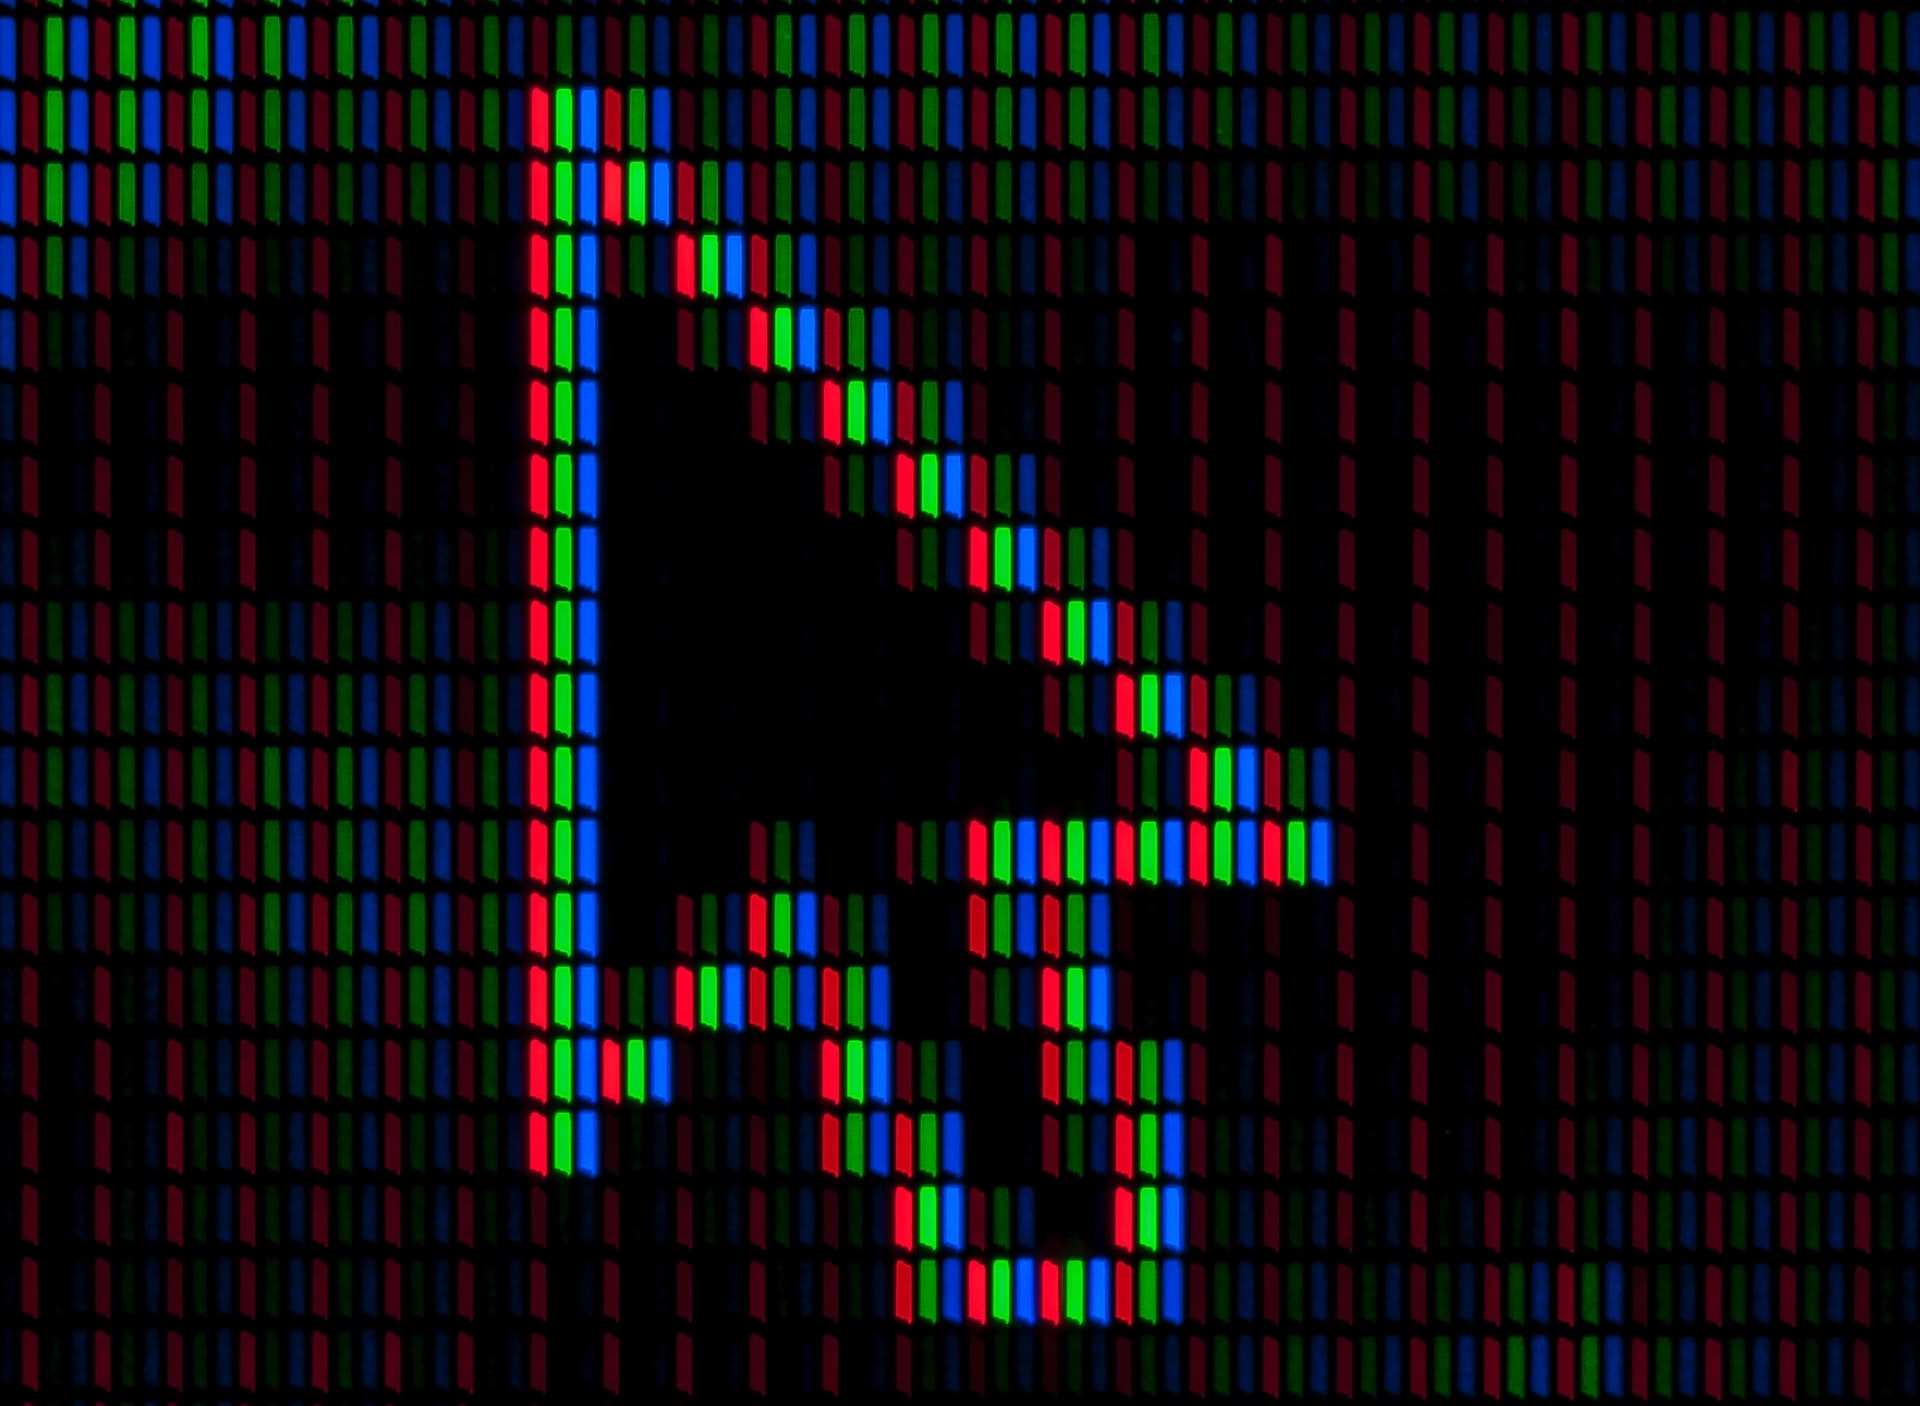 A very close subpixel image of a mouse cursor.